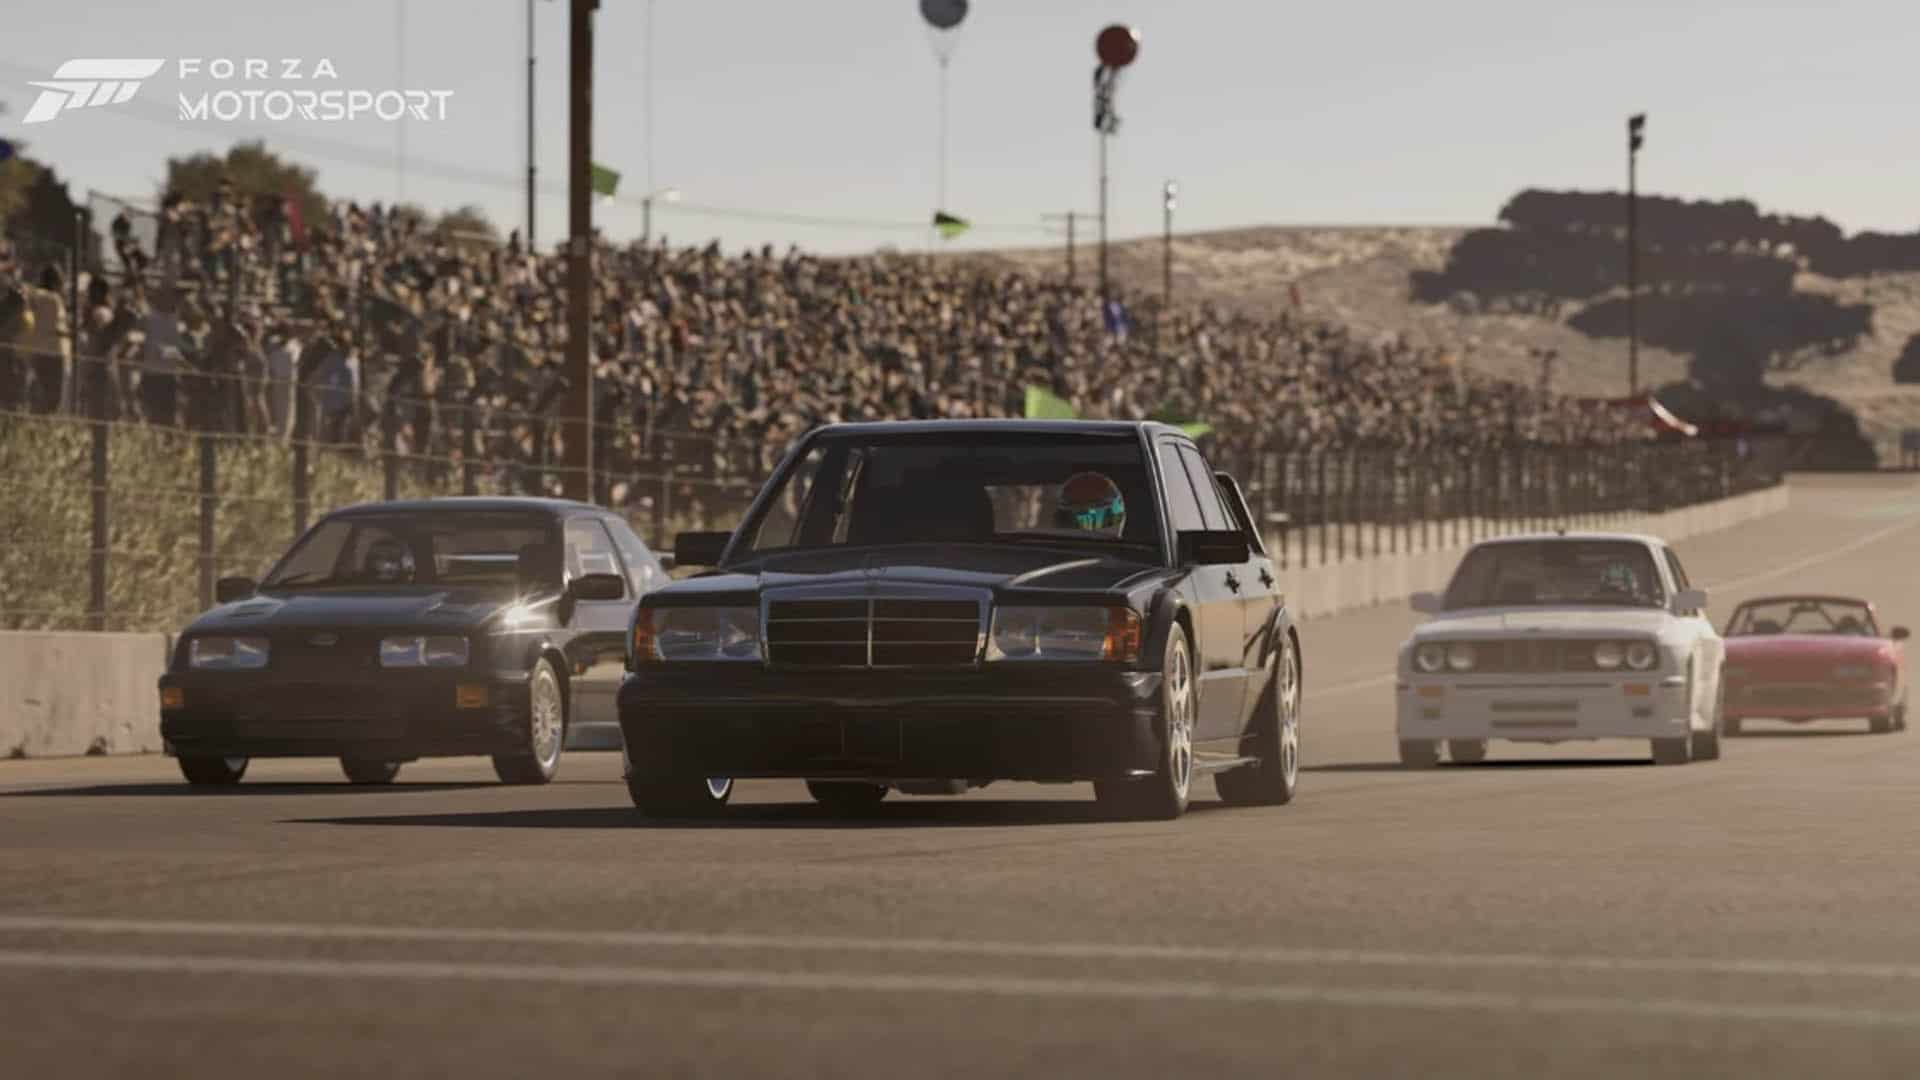 The new Forza Motorsport will feature the 1960s Laguna Seca layout